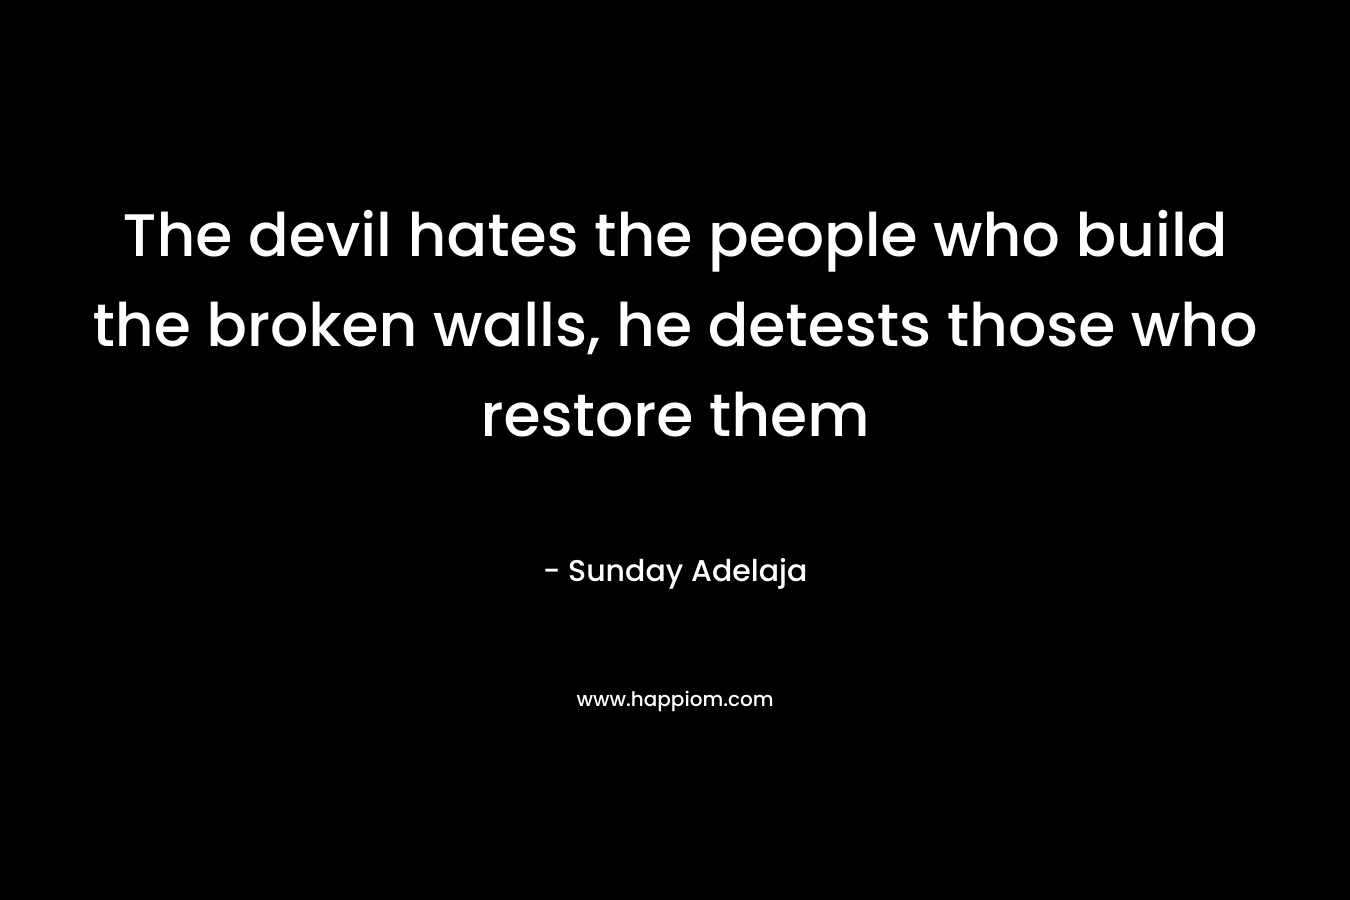 The devil hates the people who build the broken walls, he detests those who restore them